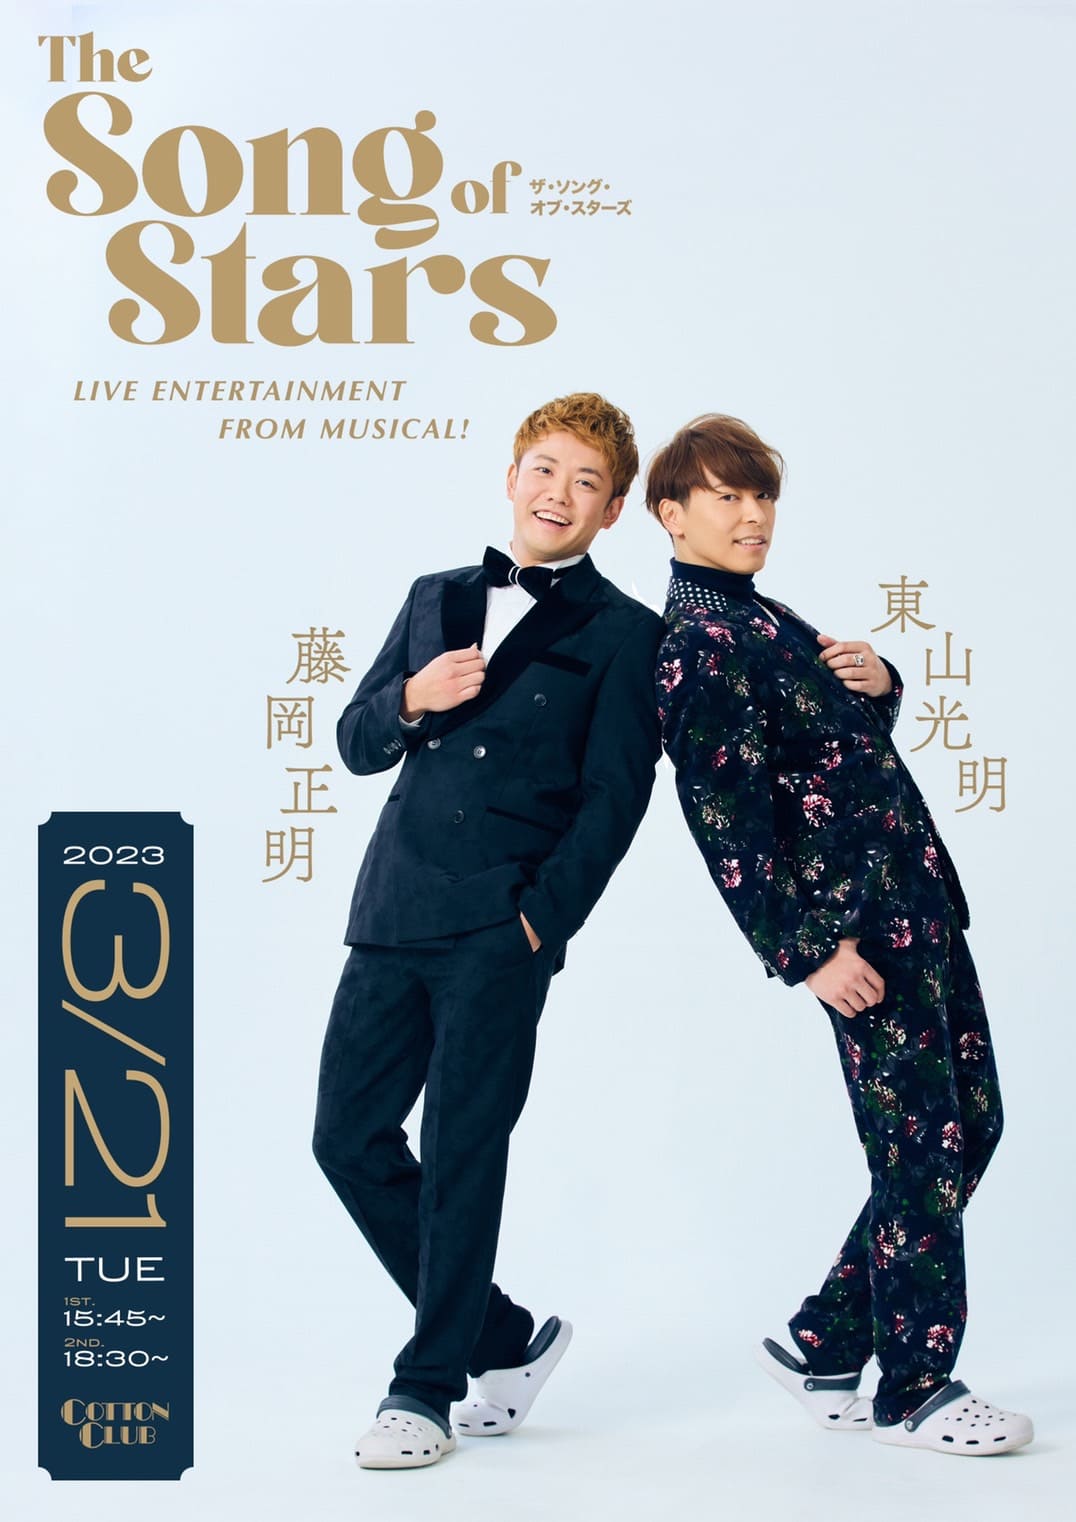 【3/21 2nd.show】東山光明×藤岡正明『The Song of Stars』 ～Live Entertainment from Musical～